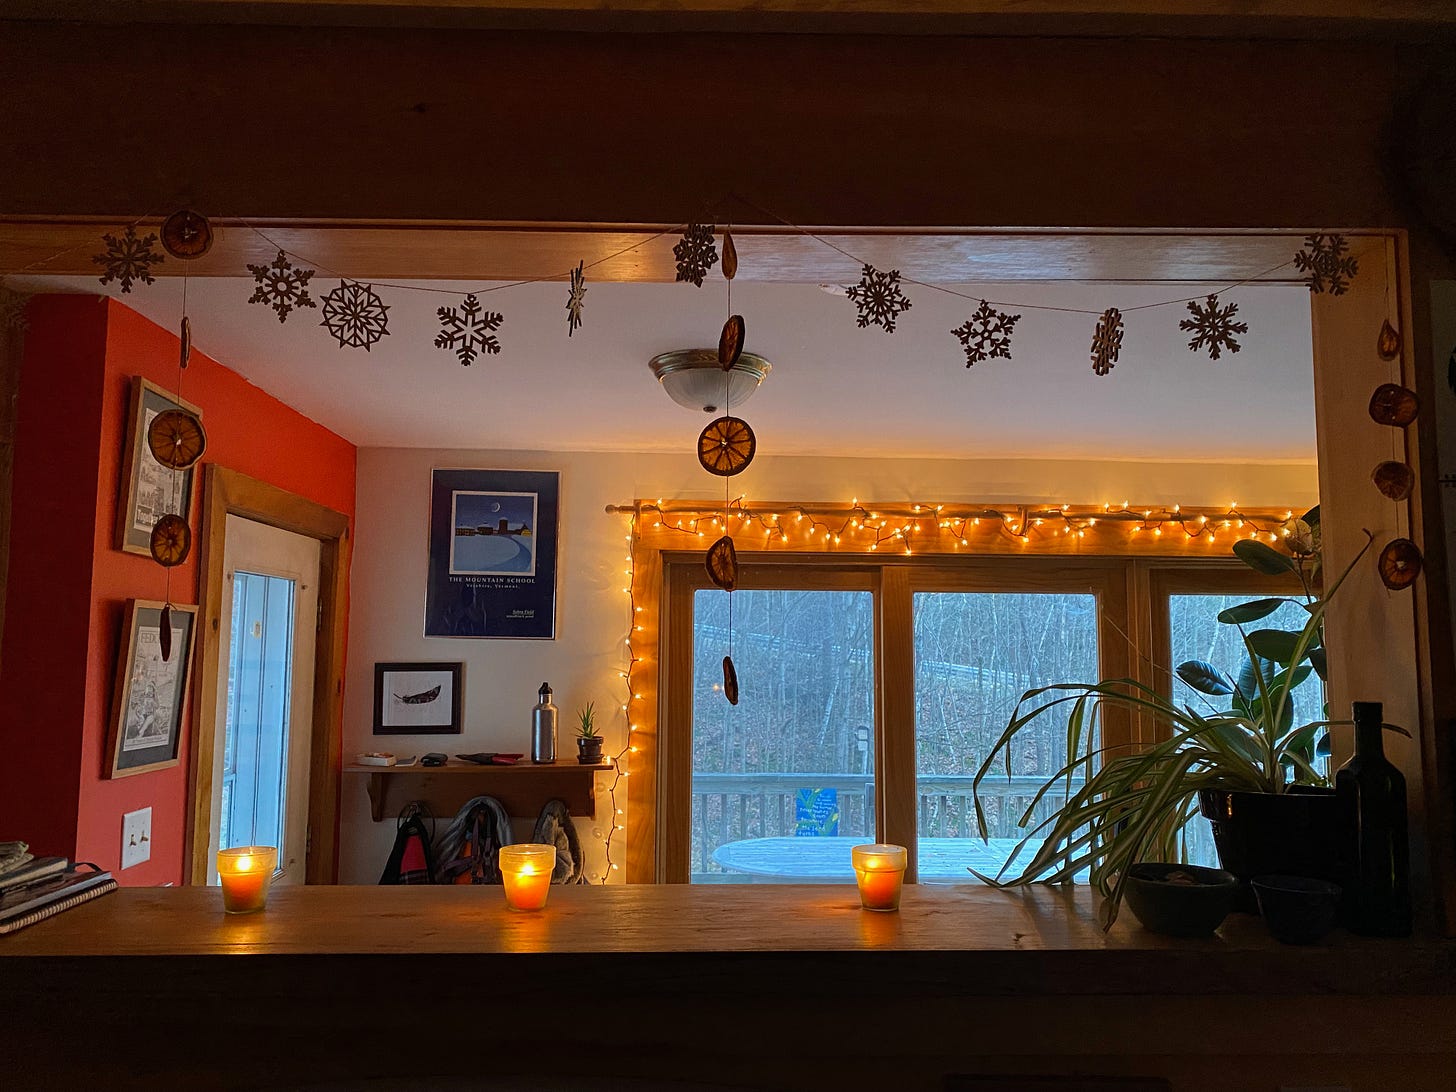 Wooden snowflakes and dried orange garlands hanging above a kitchen counter. There are lit candles on the counter and twinkling lights strung along the windows.